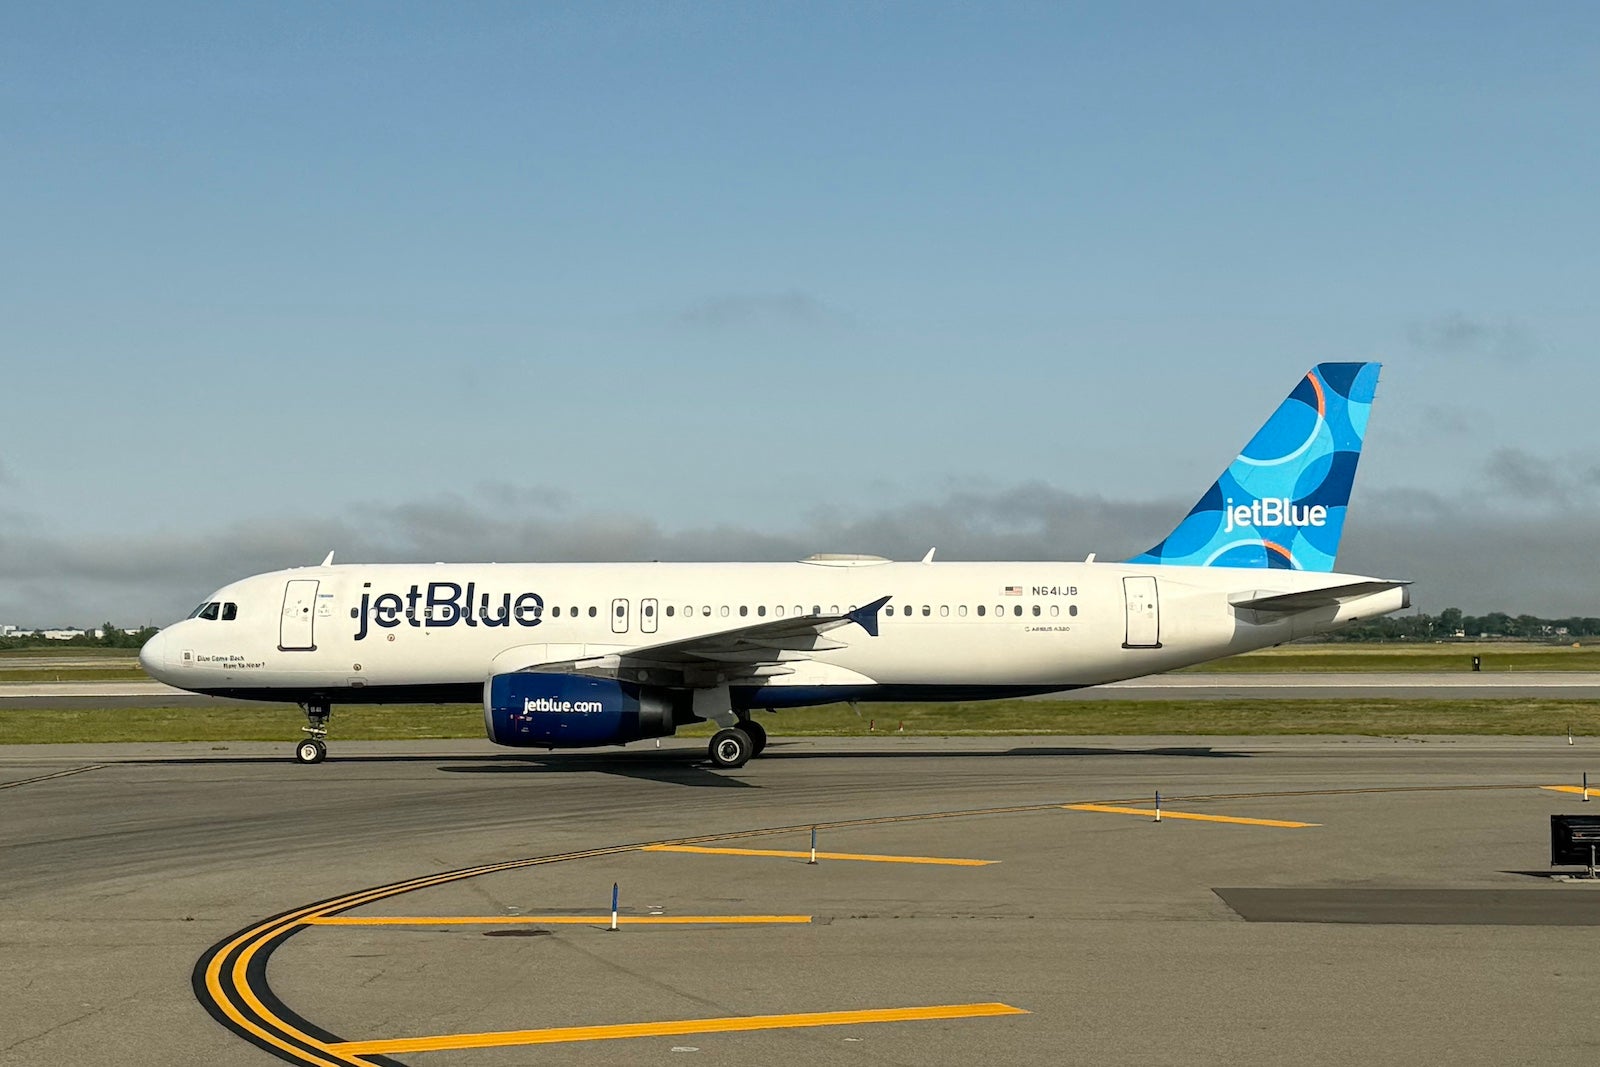 JetBlue to launch service from Islip’s Long Island MacArthur Airport